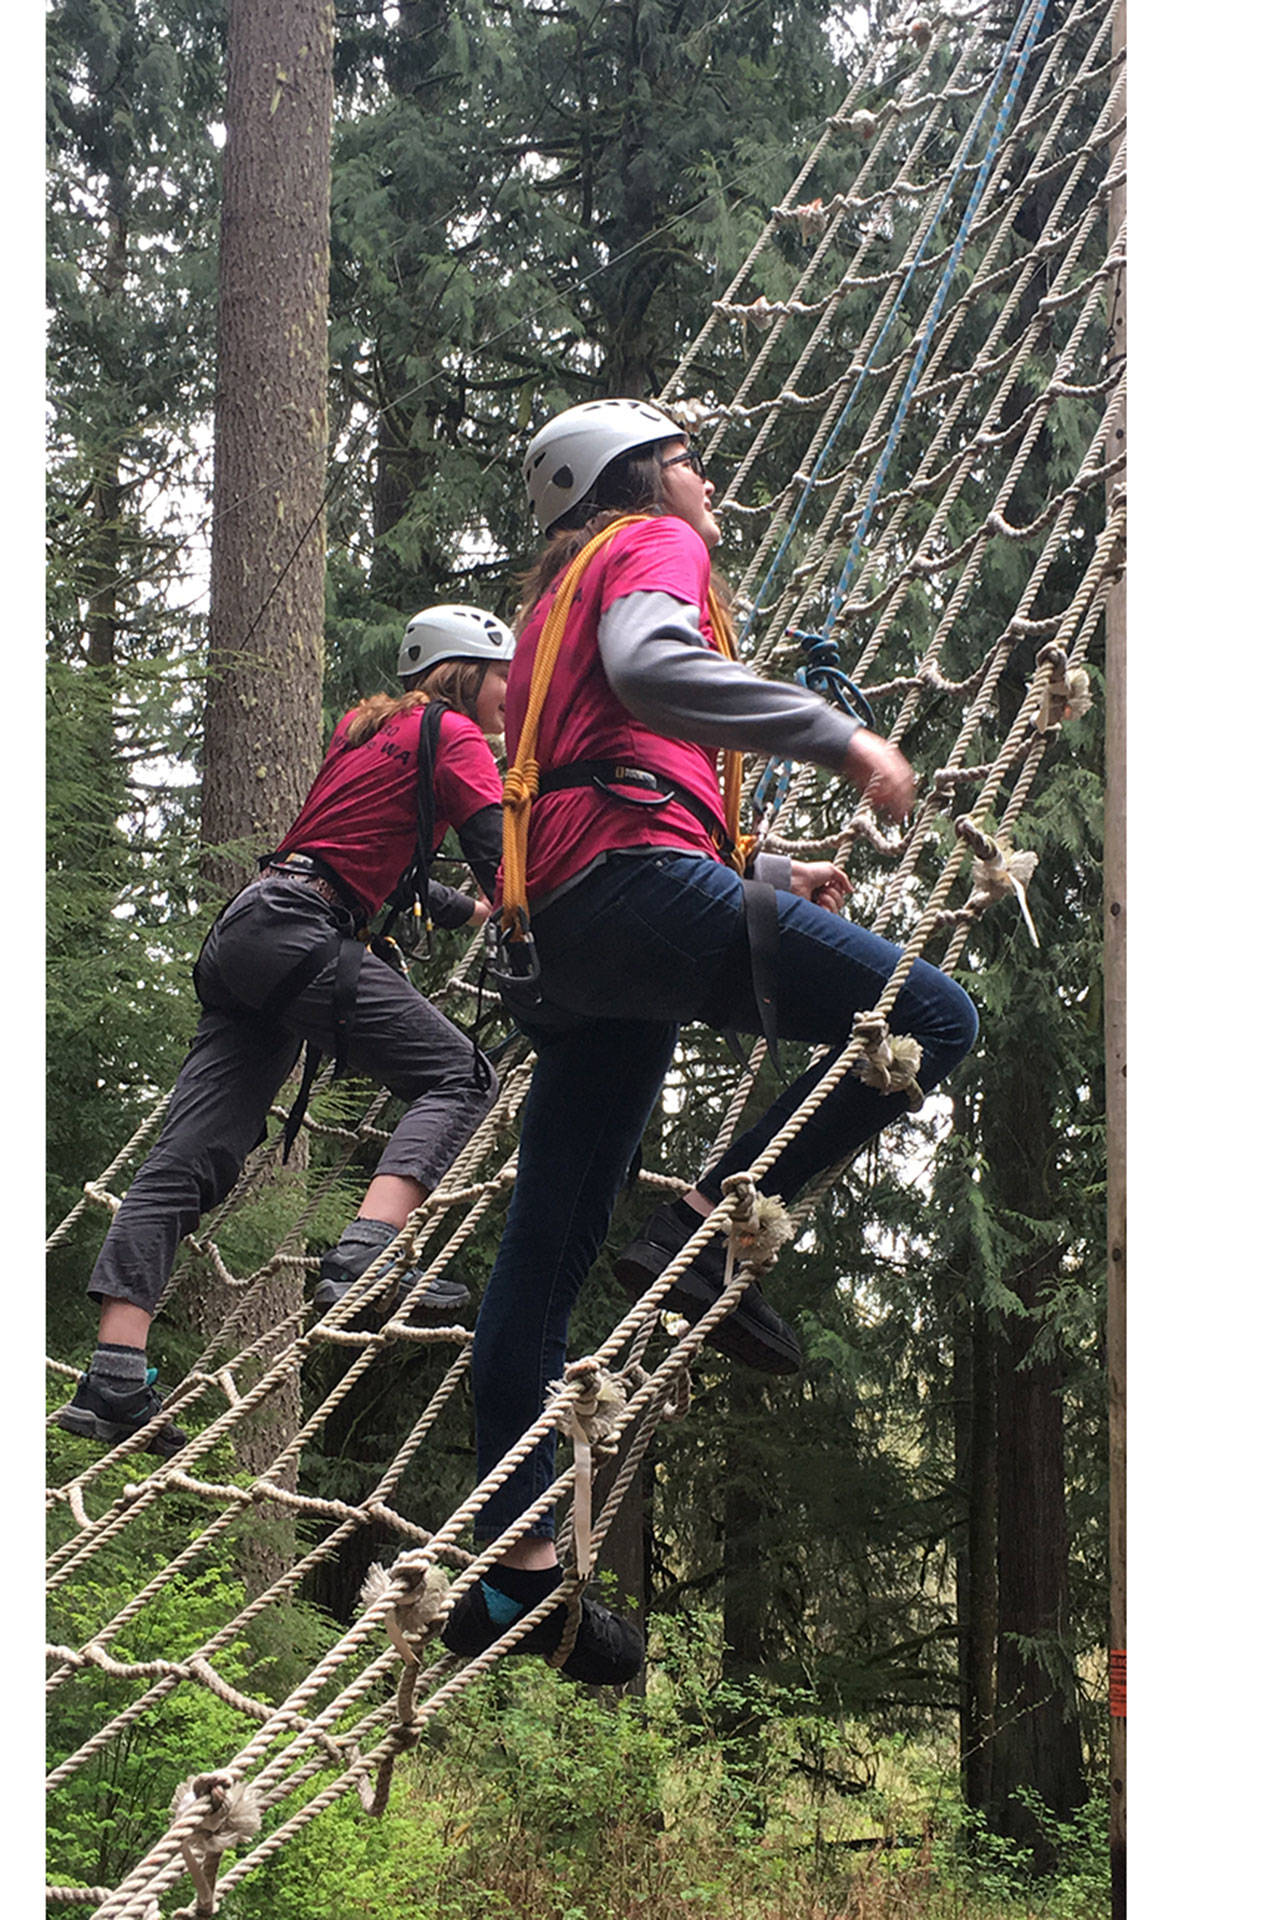 Jackie Shea and Natalie Hawkins climb up a rope ladder at Boy Scout camp. (Courtesy Photo)